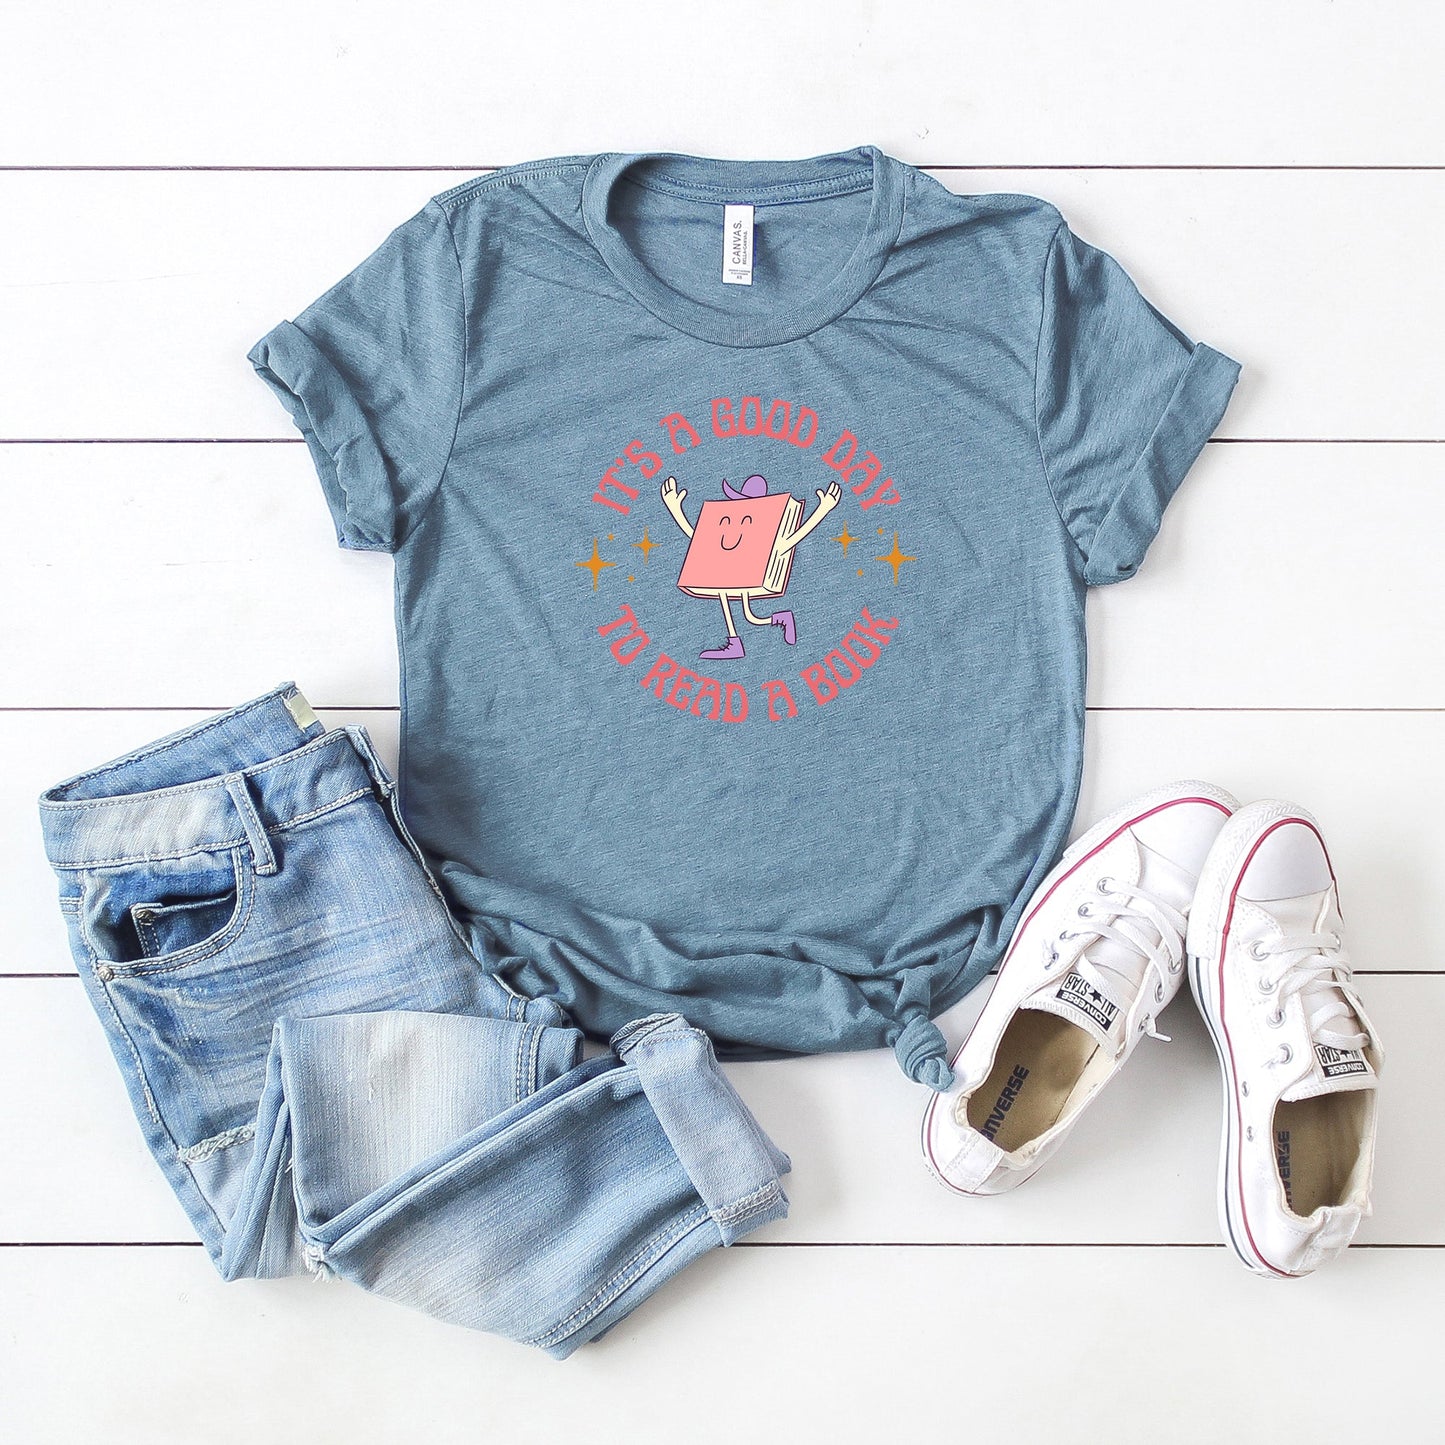 It's A Good Day To Read A Book | Short Sleeve Graphic Tee